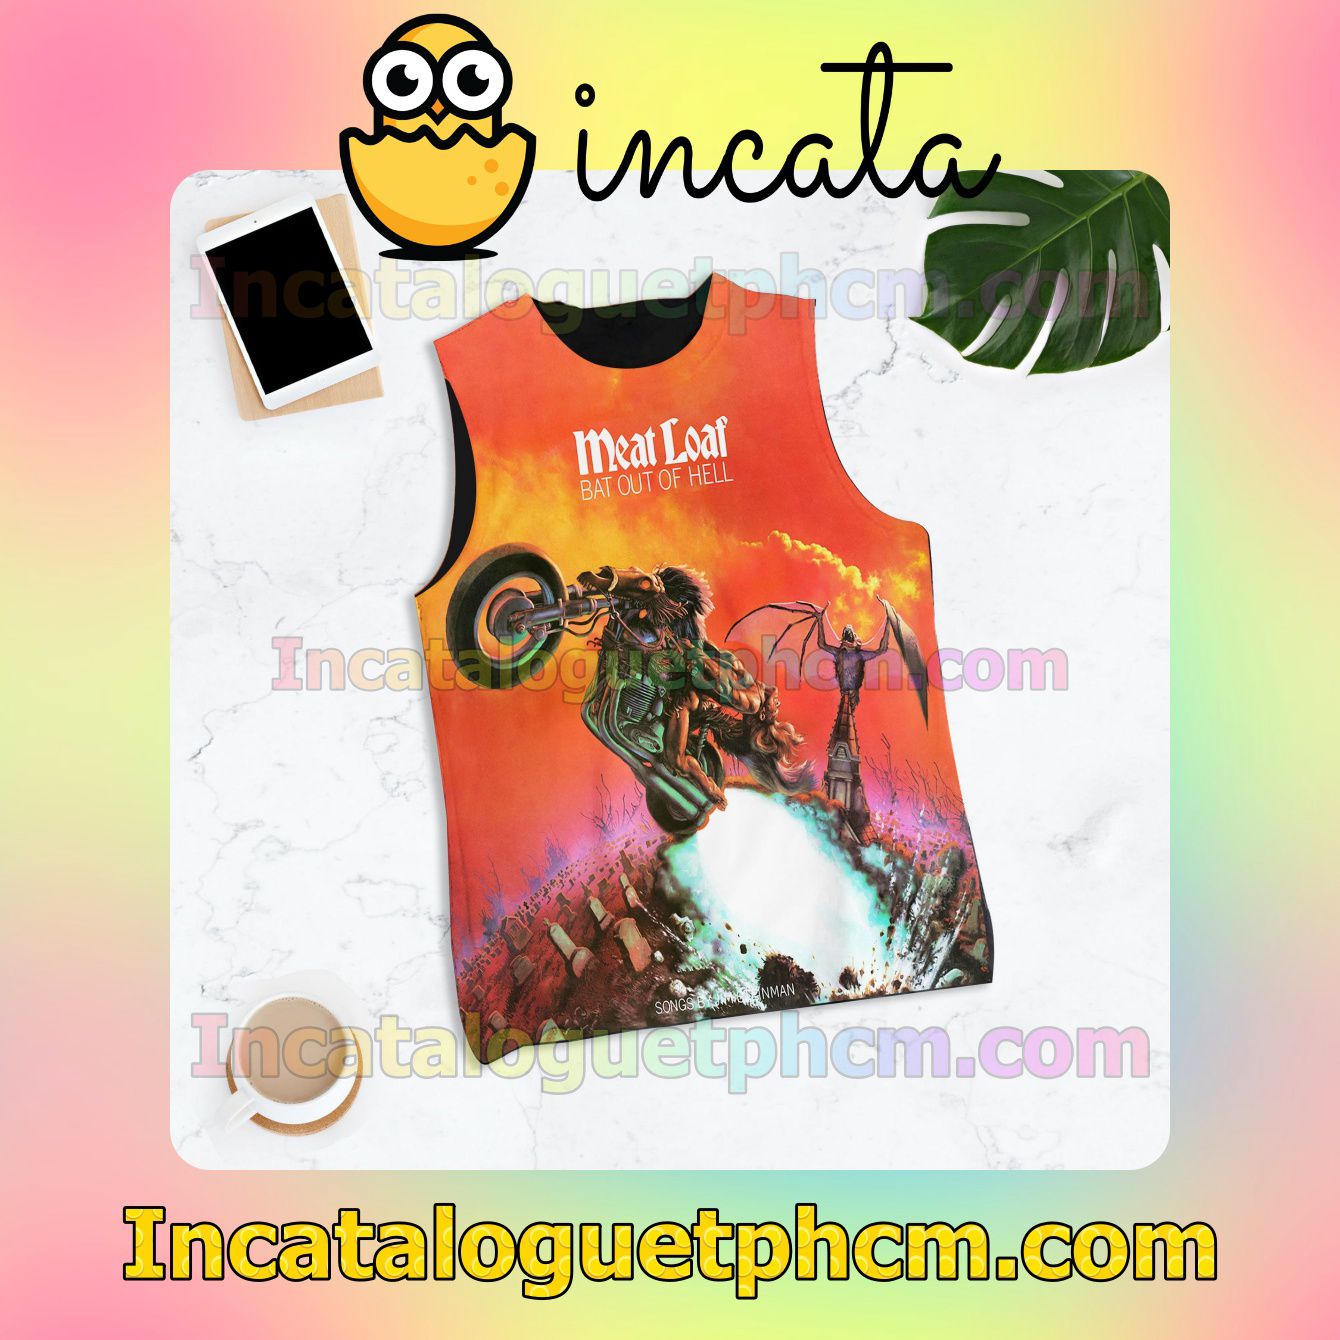 Meat Loaf Bat Out Of Hell Album Cover Sleeveless Racer Back Tank Tops